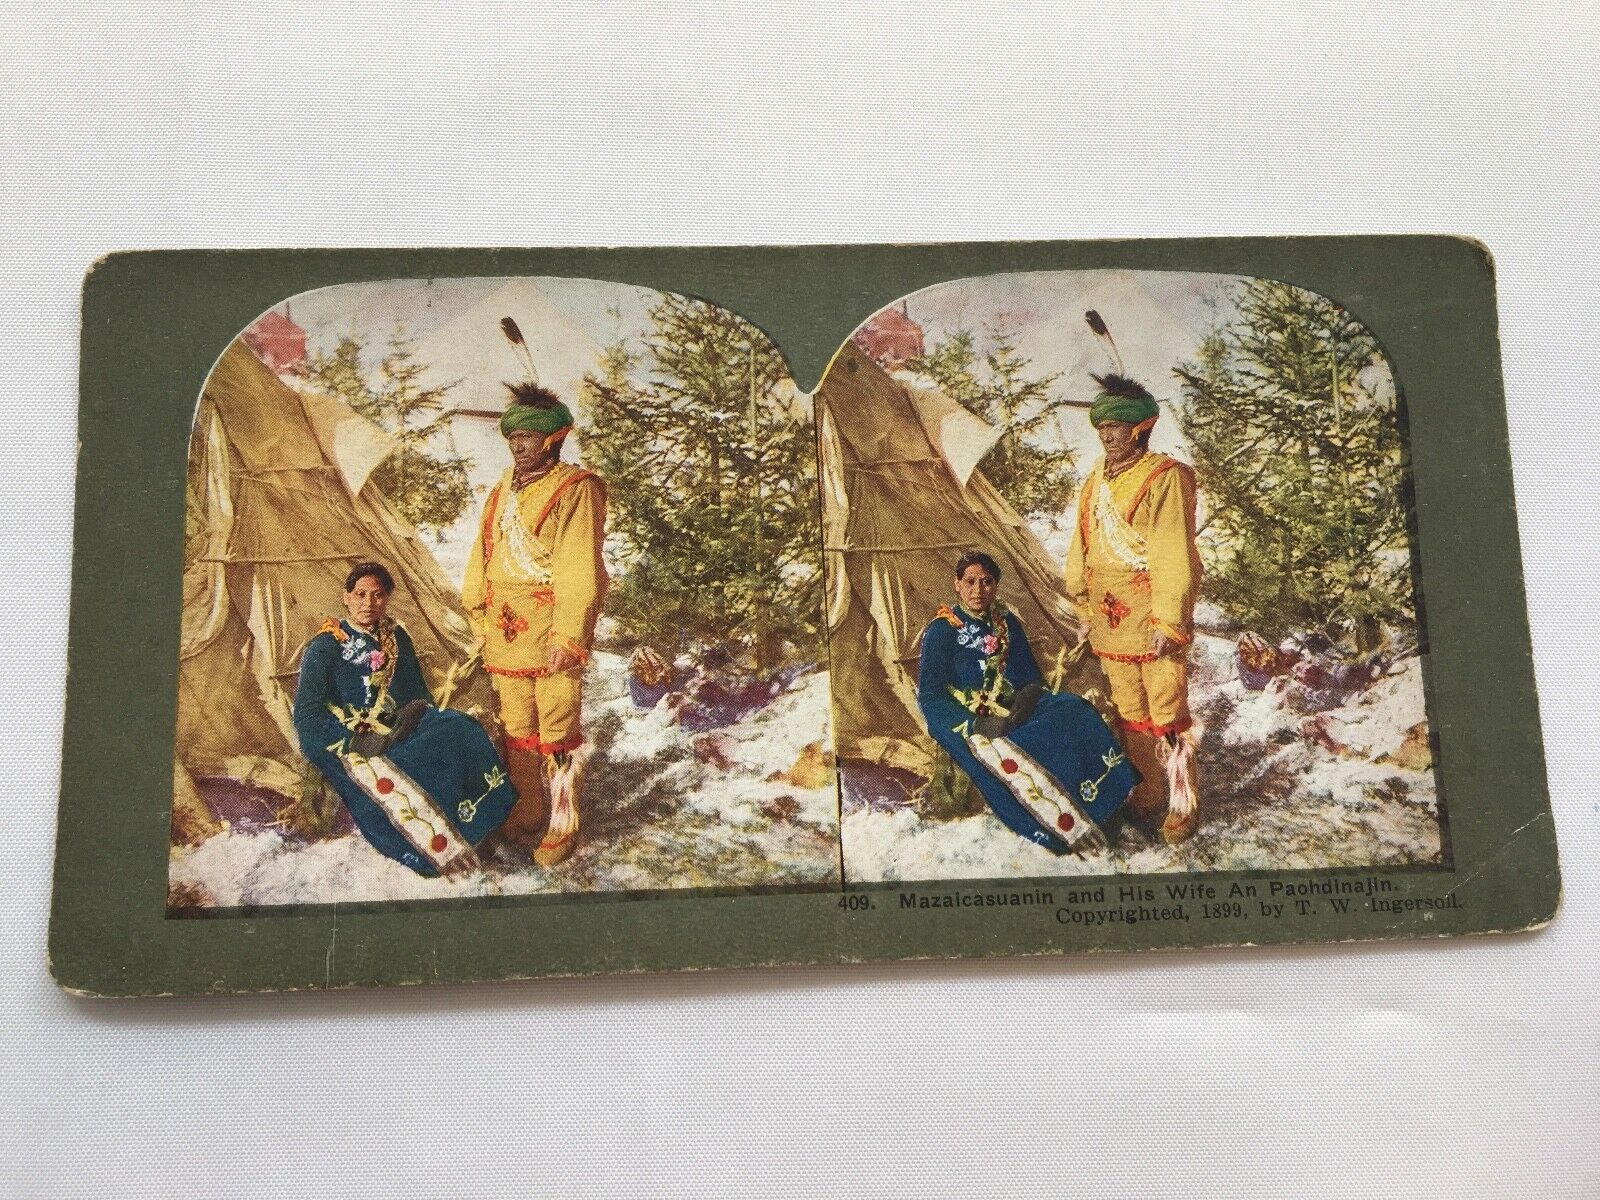 Mazaicasuanin and His Wife An Paohdinajin Color Stereoview Card: Ingersoll # 409